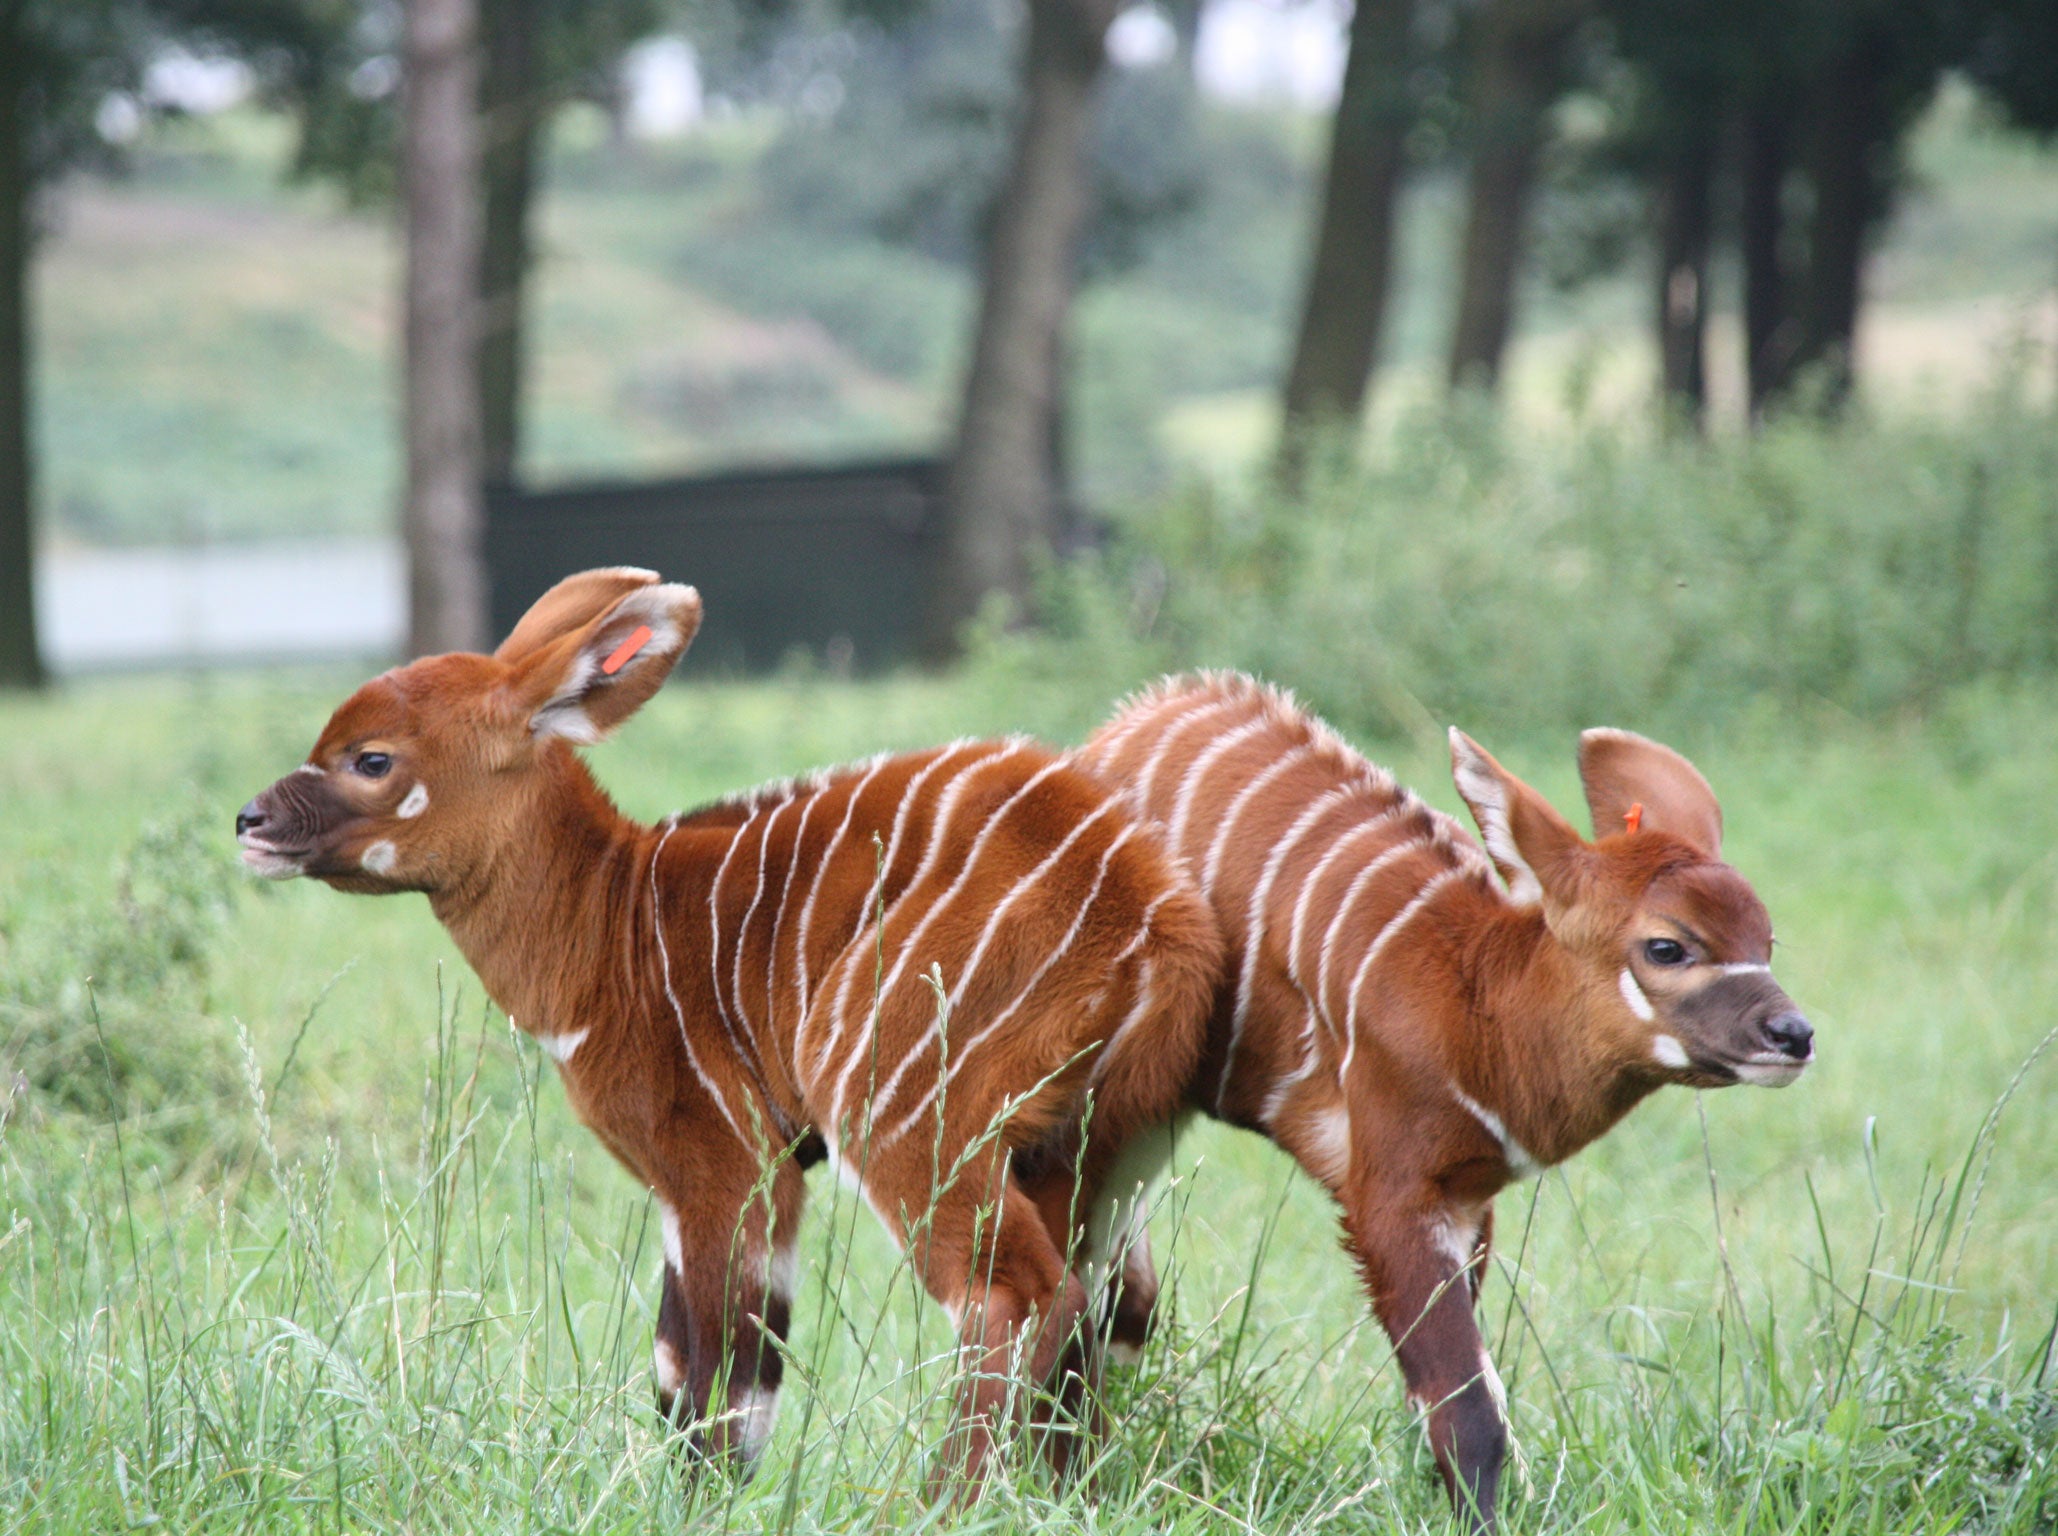 Millie's two calves, showing off their striped hair